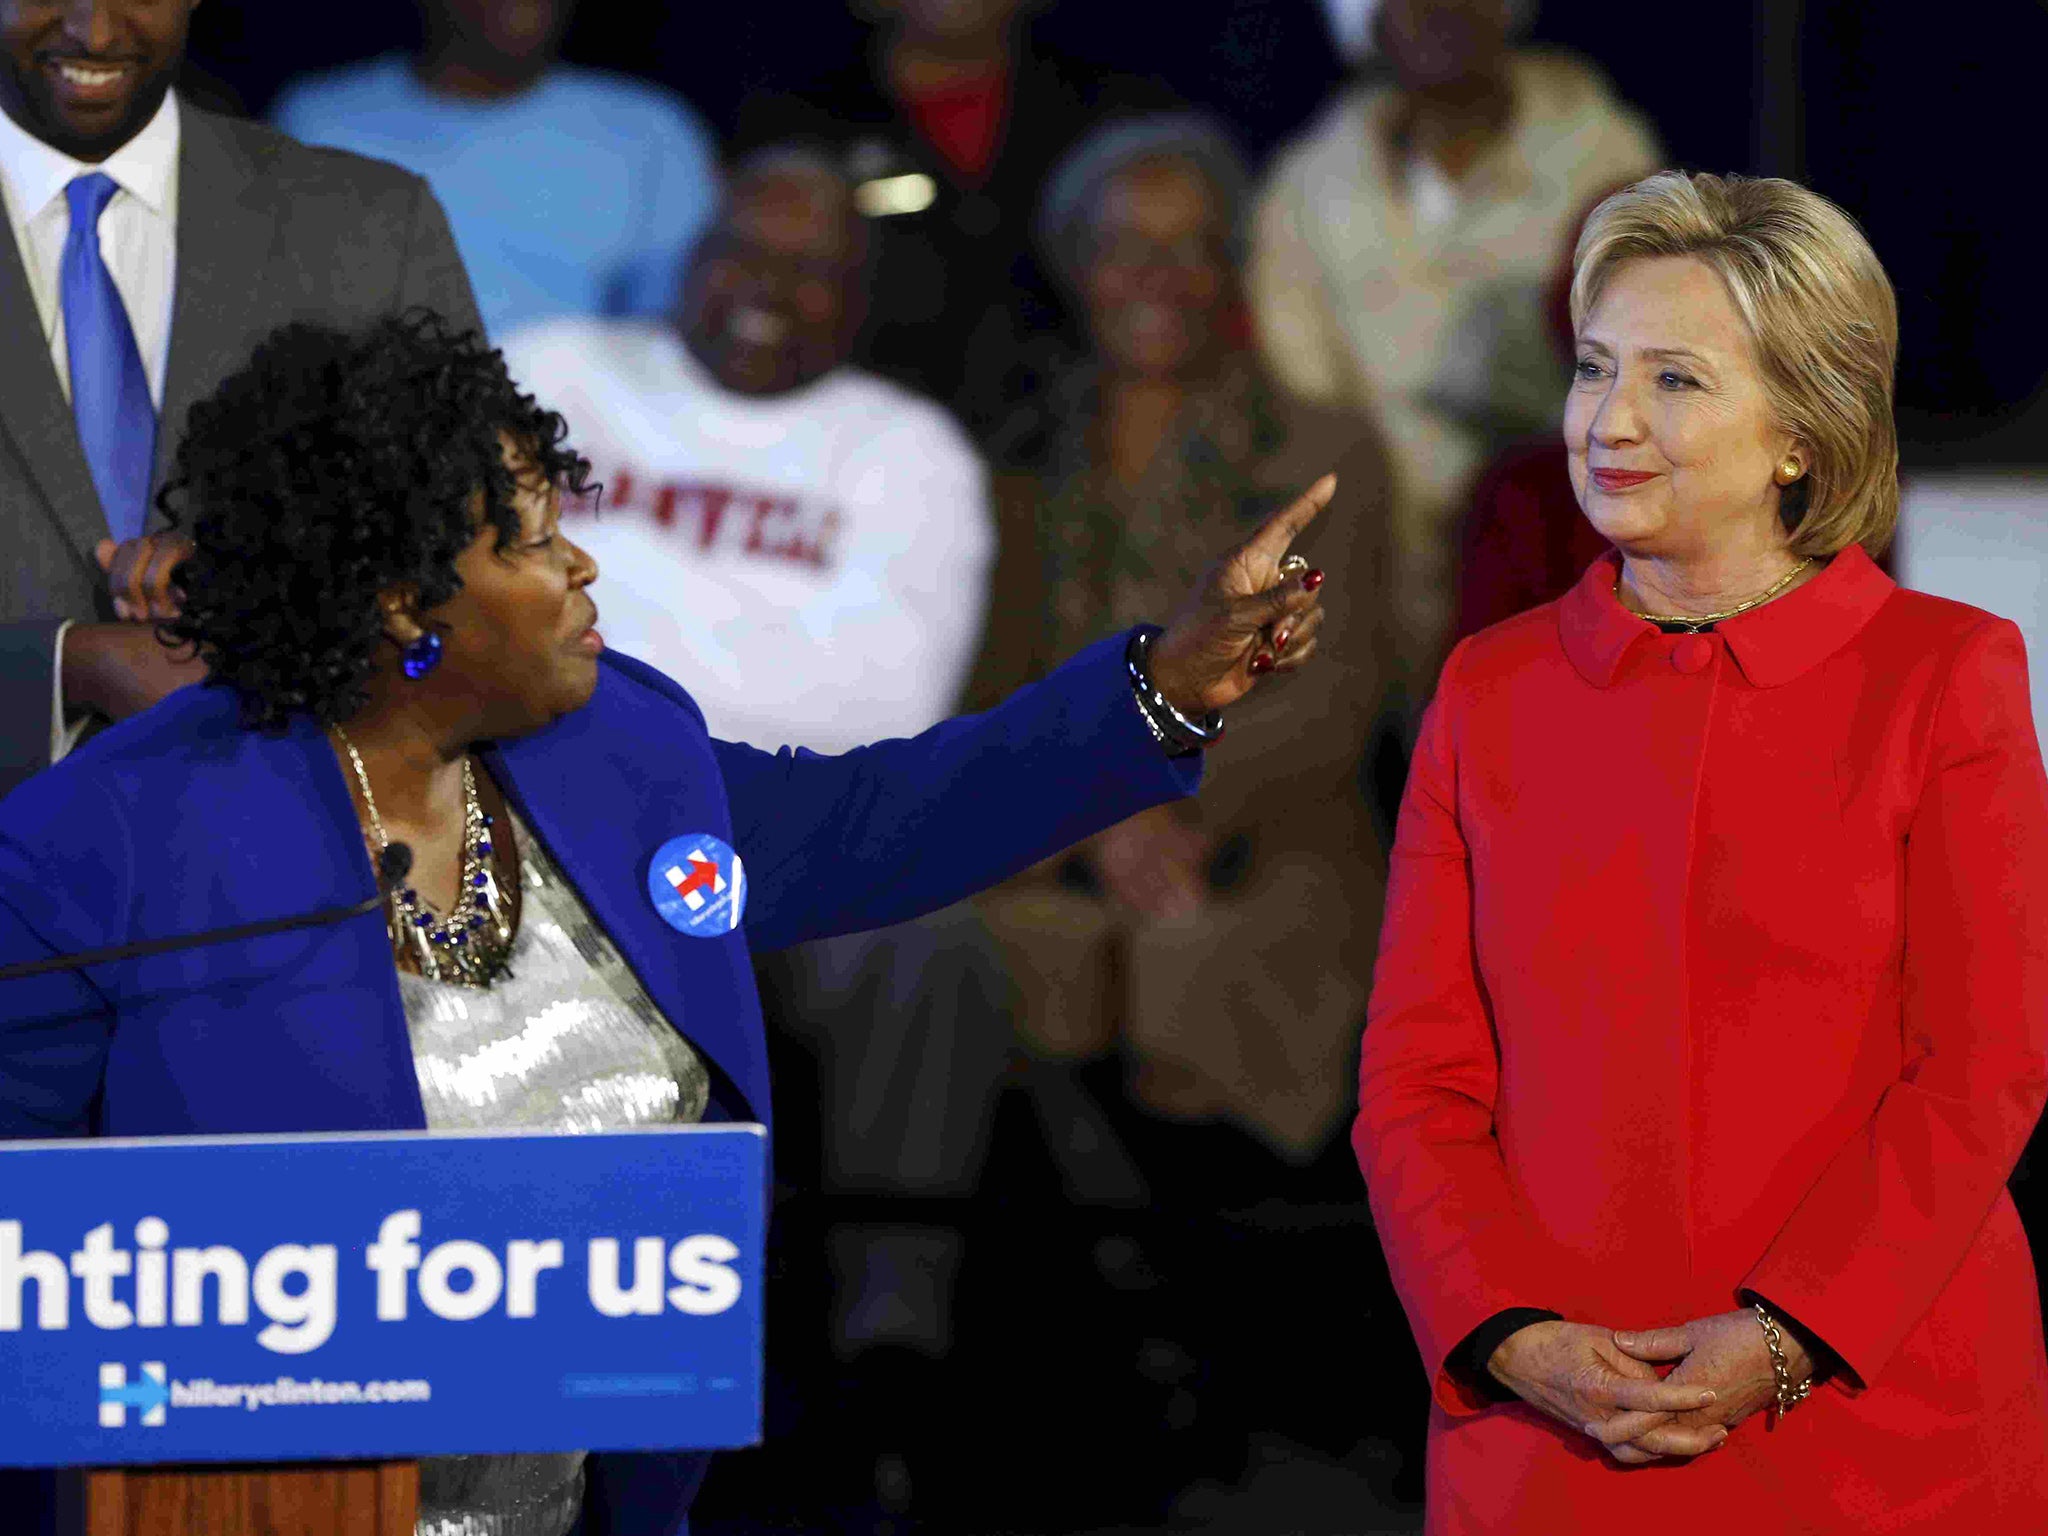 Bamberg County Schools Superintendent Thelma Sojourner (L) introduces Democratic U.S. presidential candidate Hillary Clinton during a forum at Denmark-Olar Elementary School in Denmark, South Carolina,